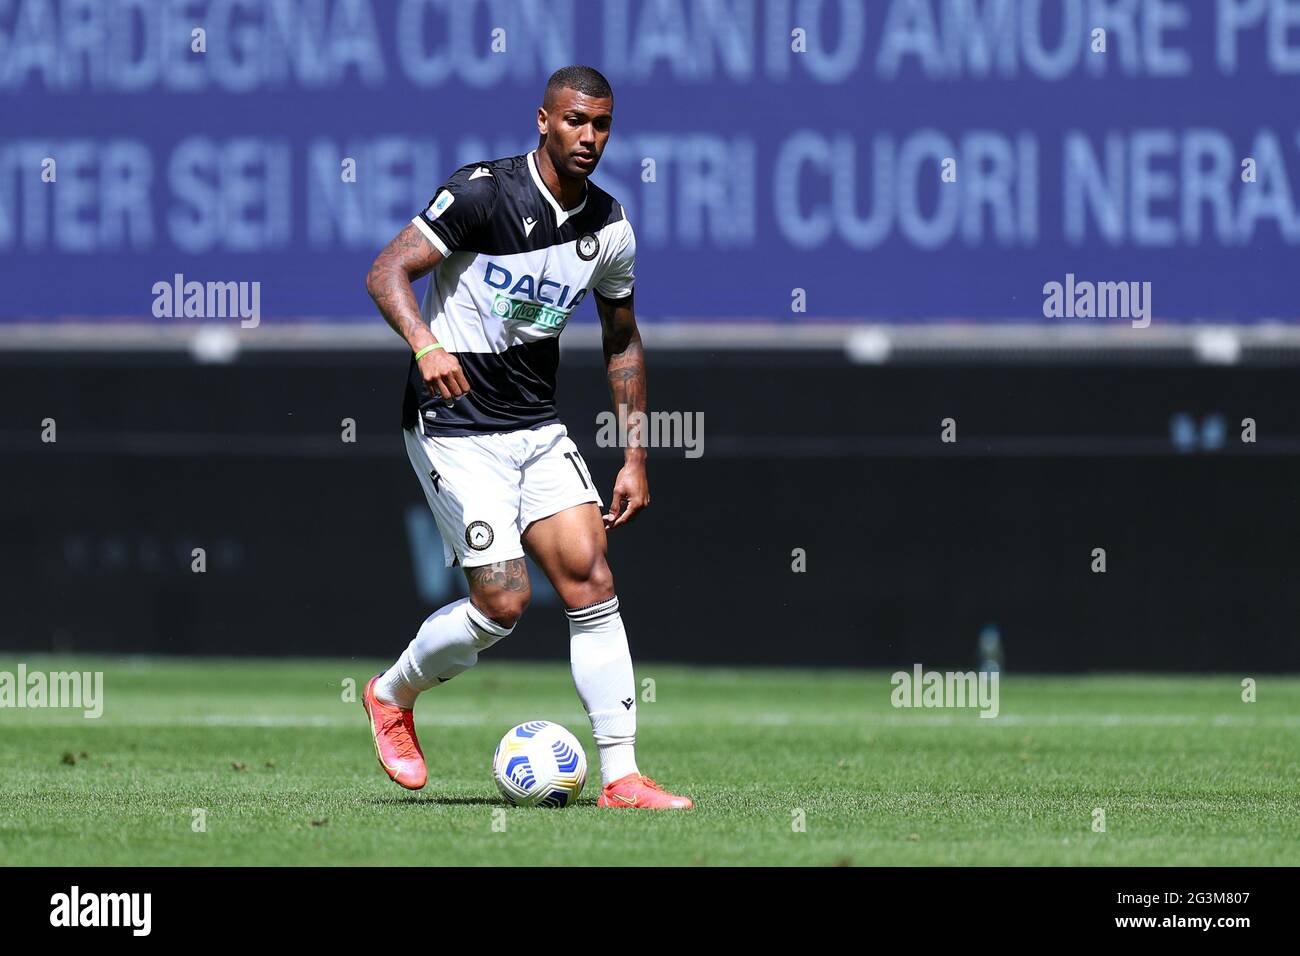 Walace Souza Silva of Udinese Calcio in action during the Serie A match  between Fc Internazionale and Udinese Calcio. Fc Internazionale wins 5-1  over Udinese Calcio Stock Photo - Alamy